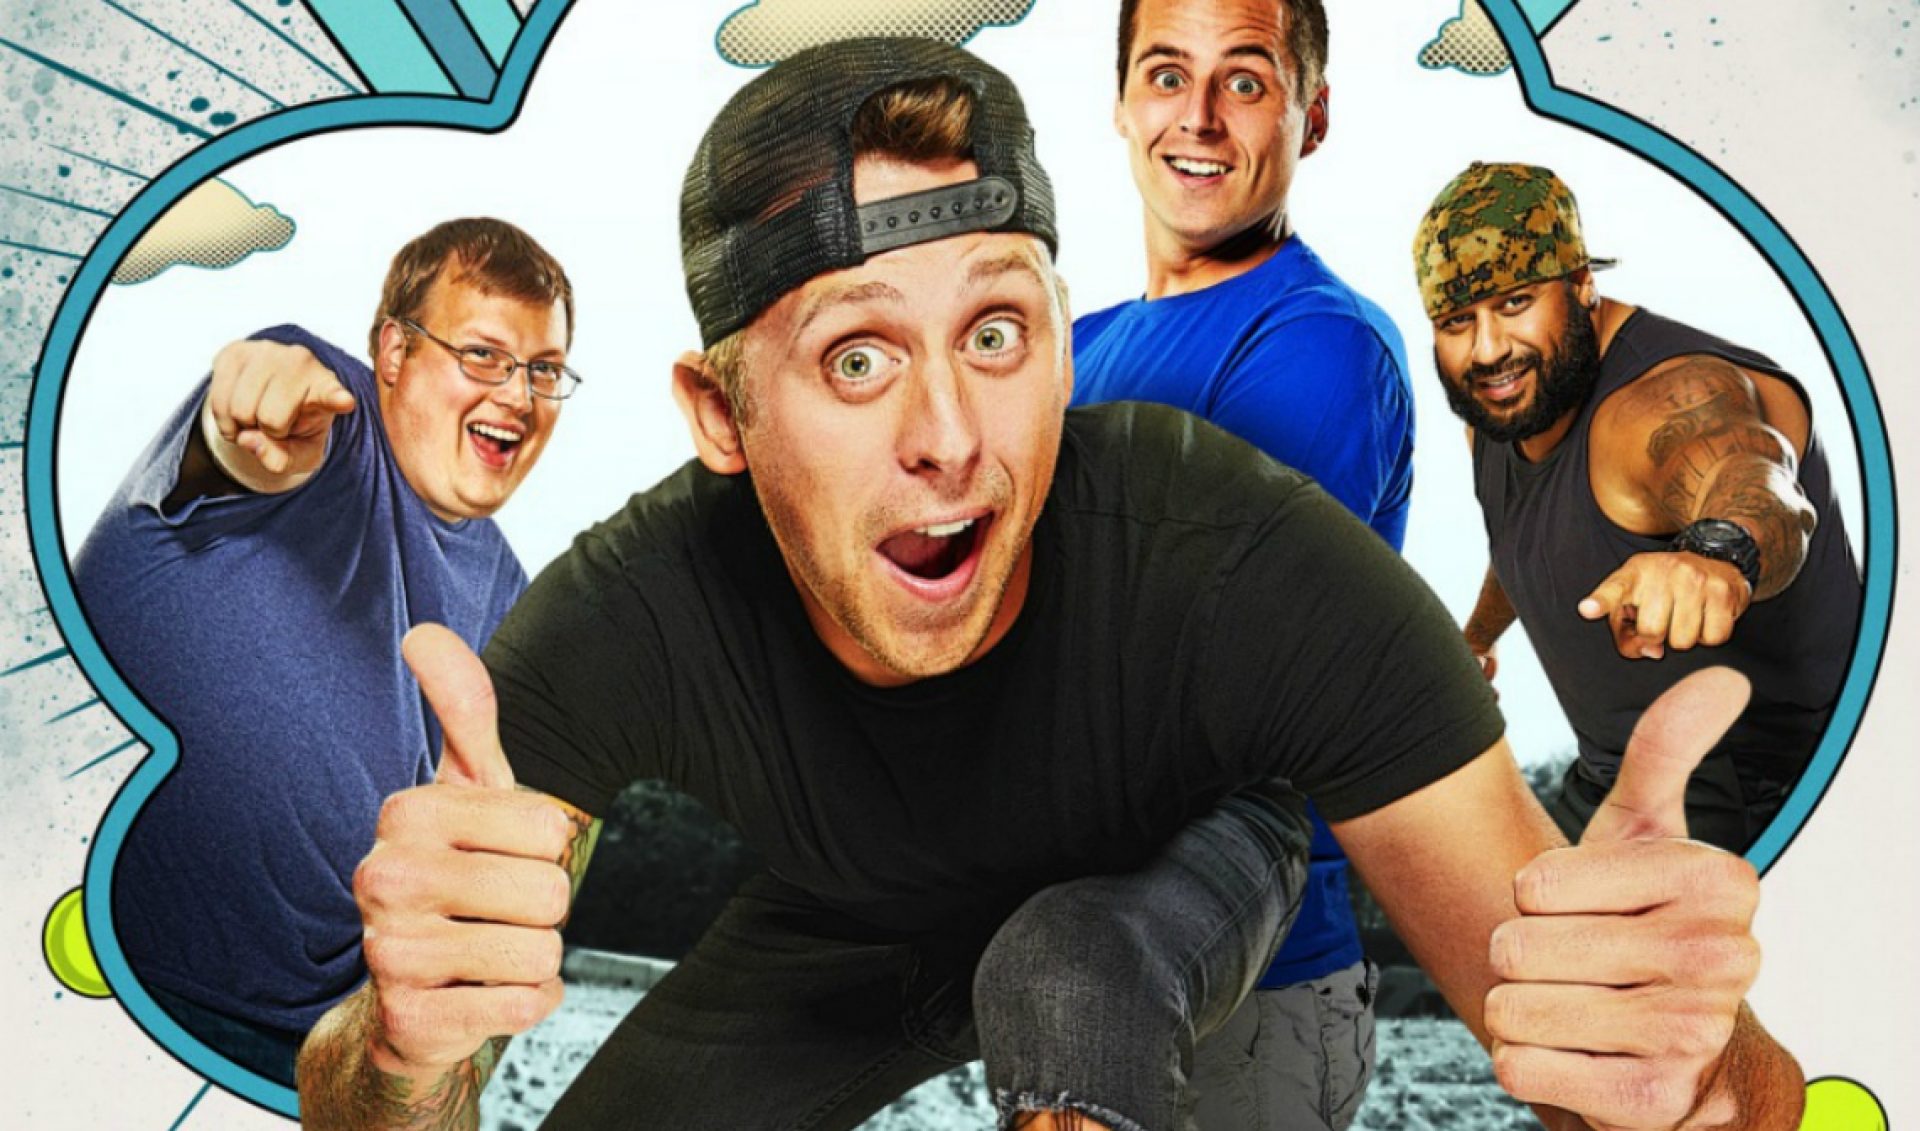 Roman Atwood, Kian Lawley, Alexis G. Zall, VSauce Among Daytime Emmy Nominees